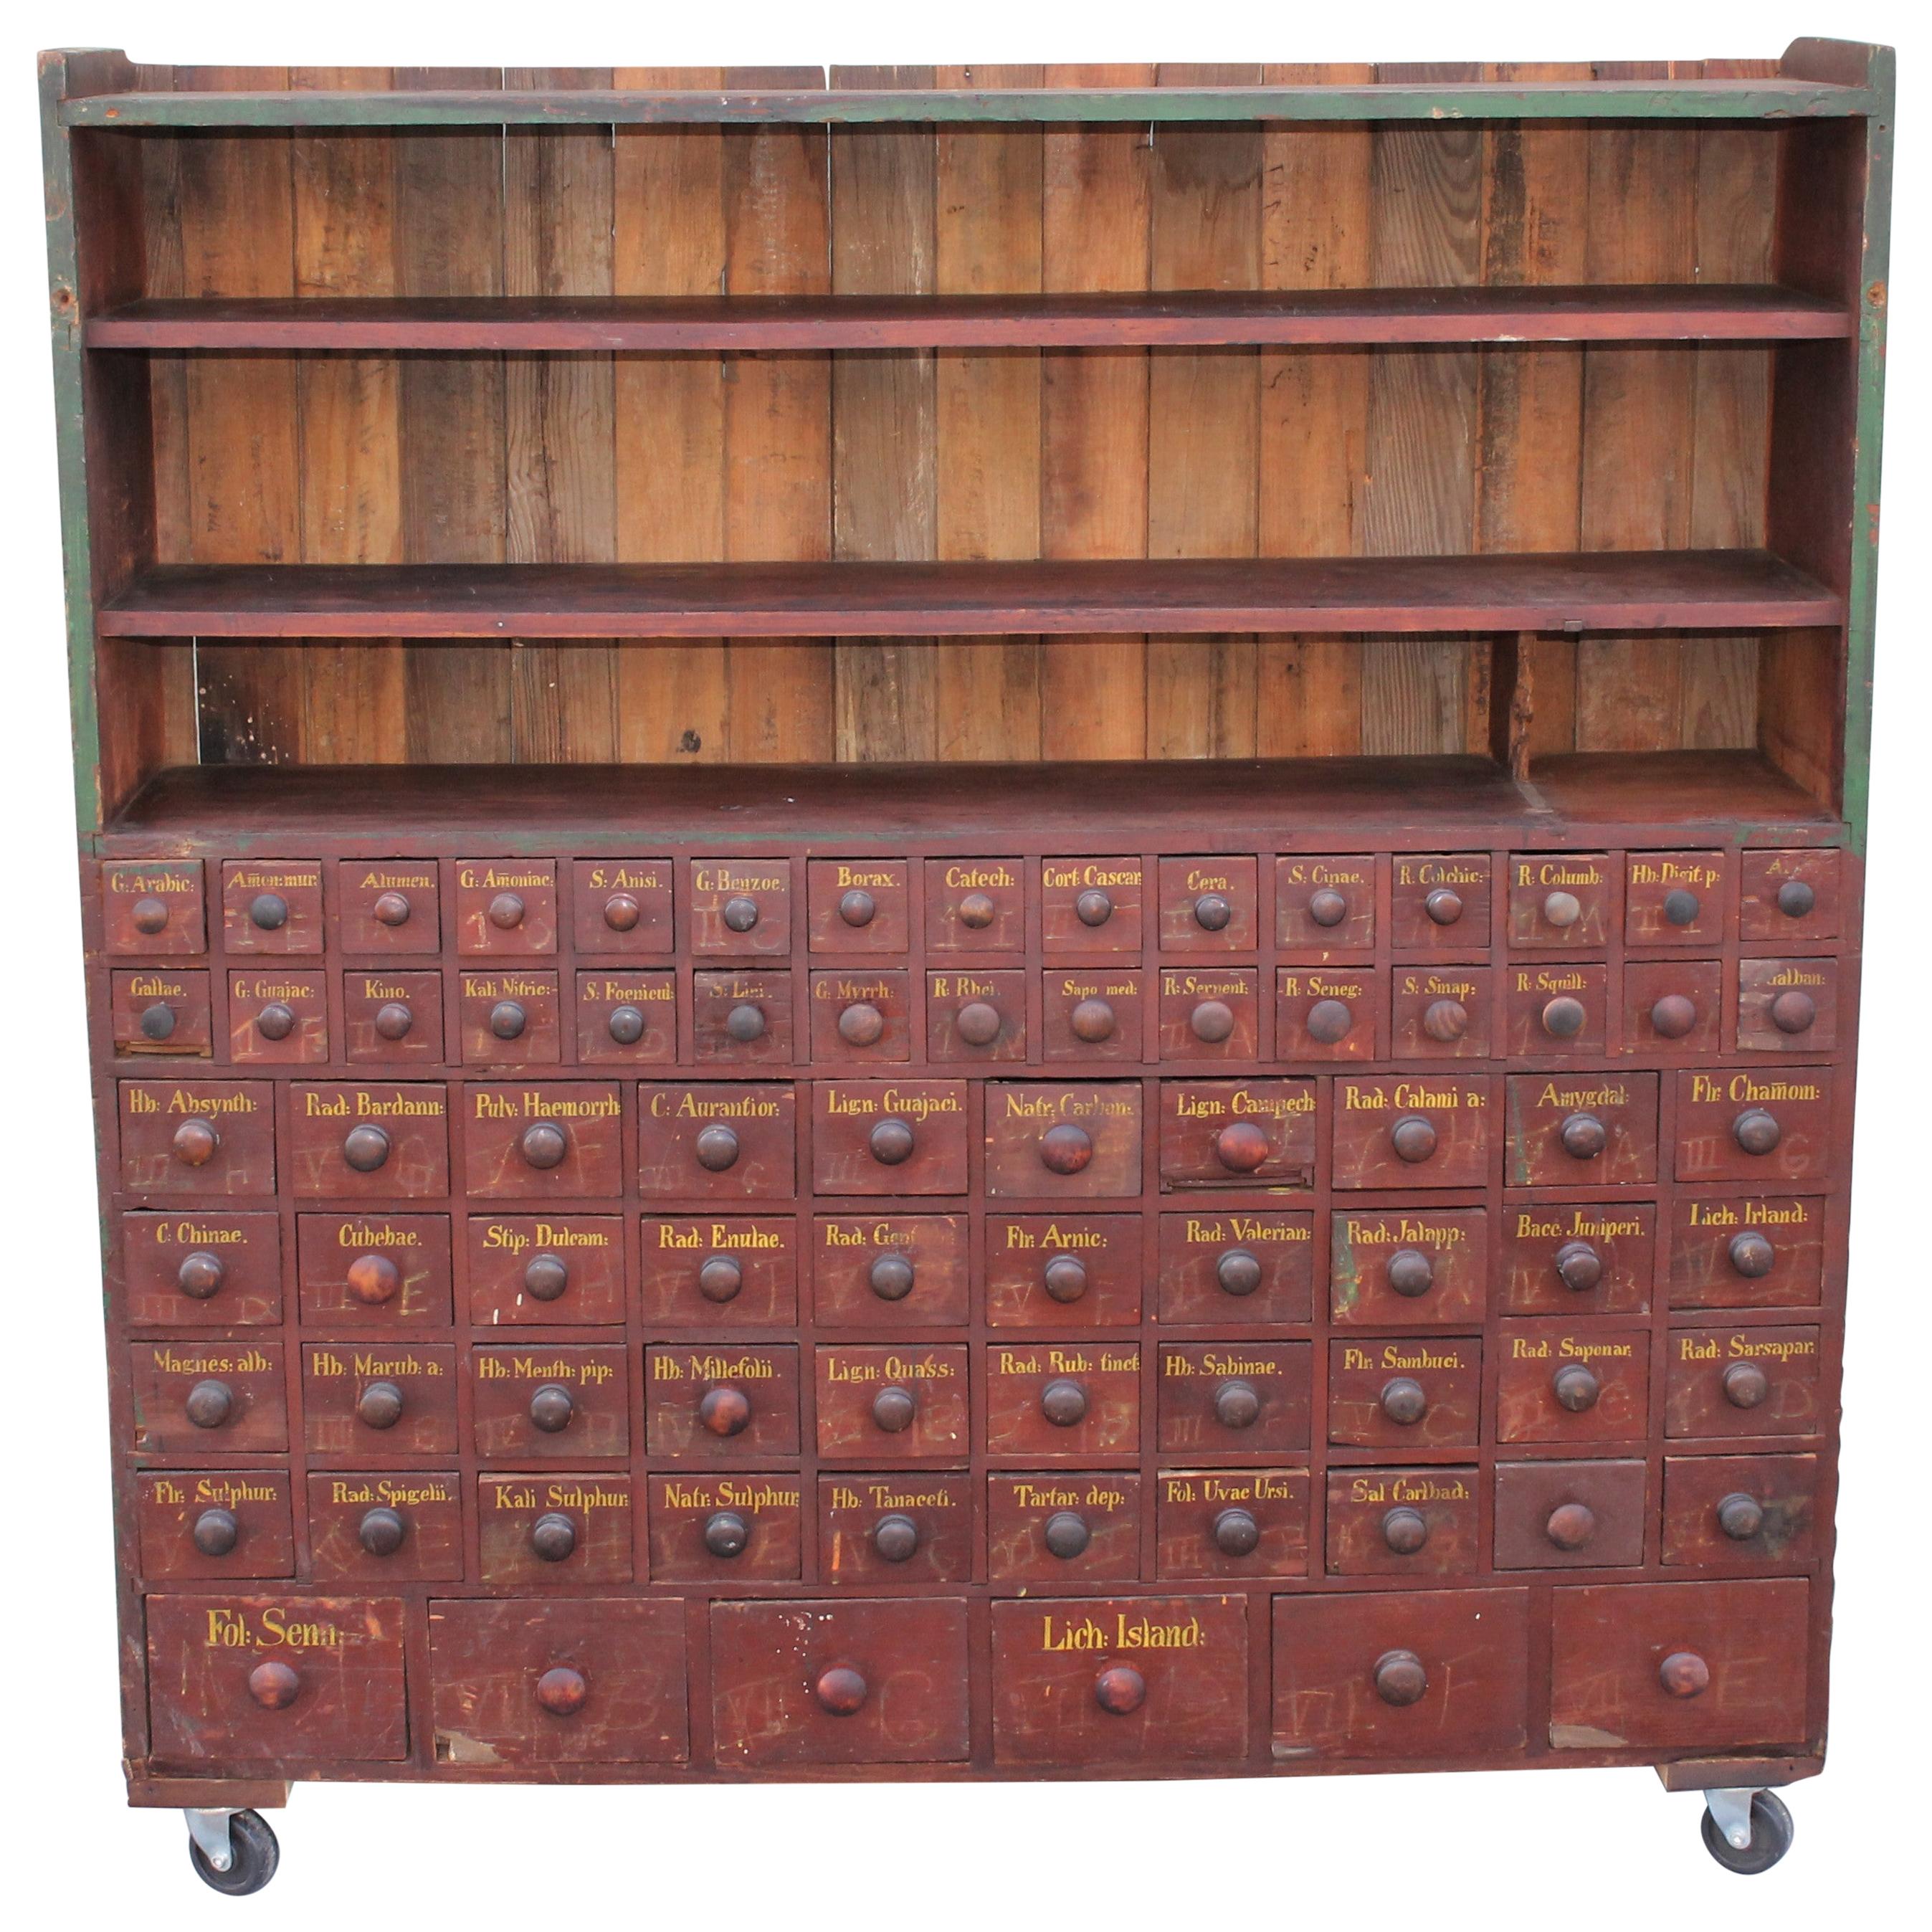 19th Century Apothecary Cabinet in Original Painted Surface, 86 Drawers